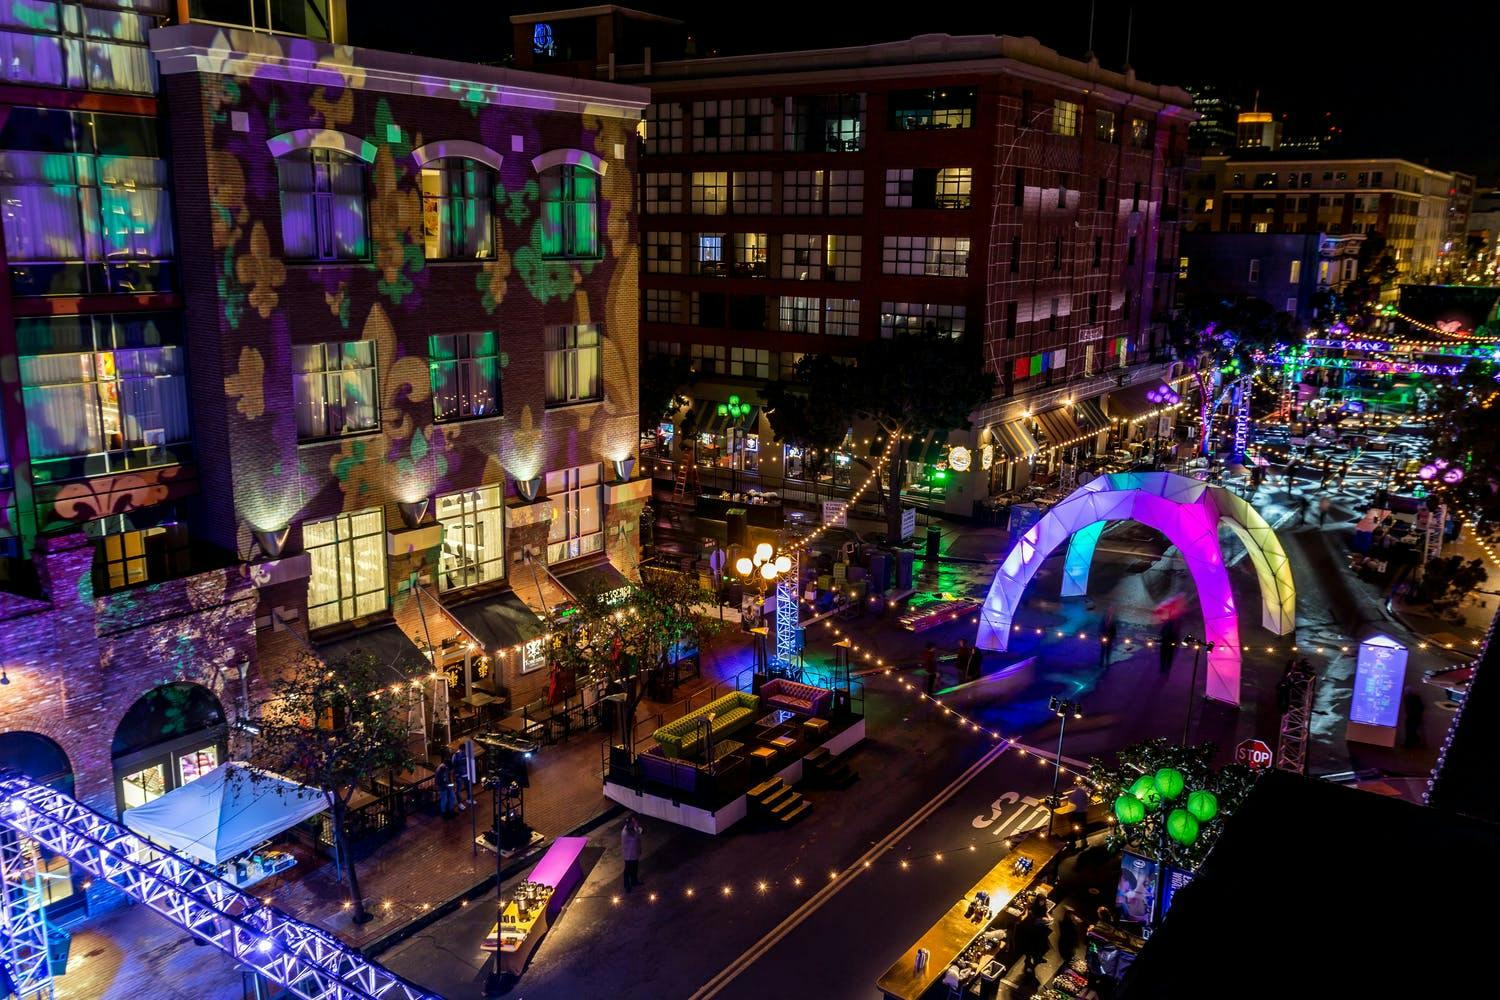 Mardi Gras party held in Gas Lamp Quarter with vibrant purple, pink, gold, and green lighting | PartySlate